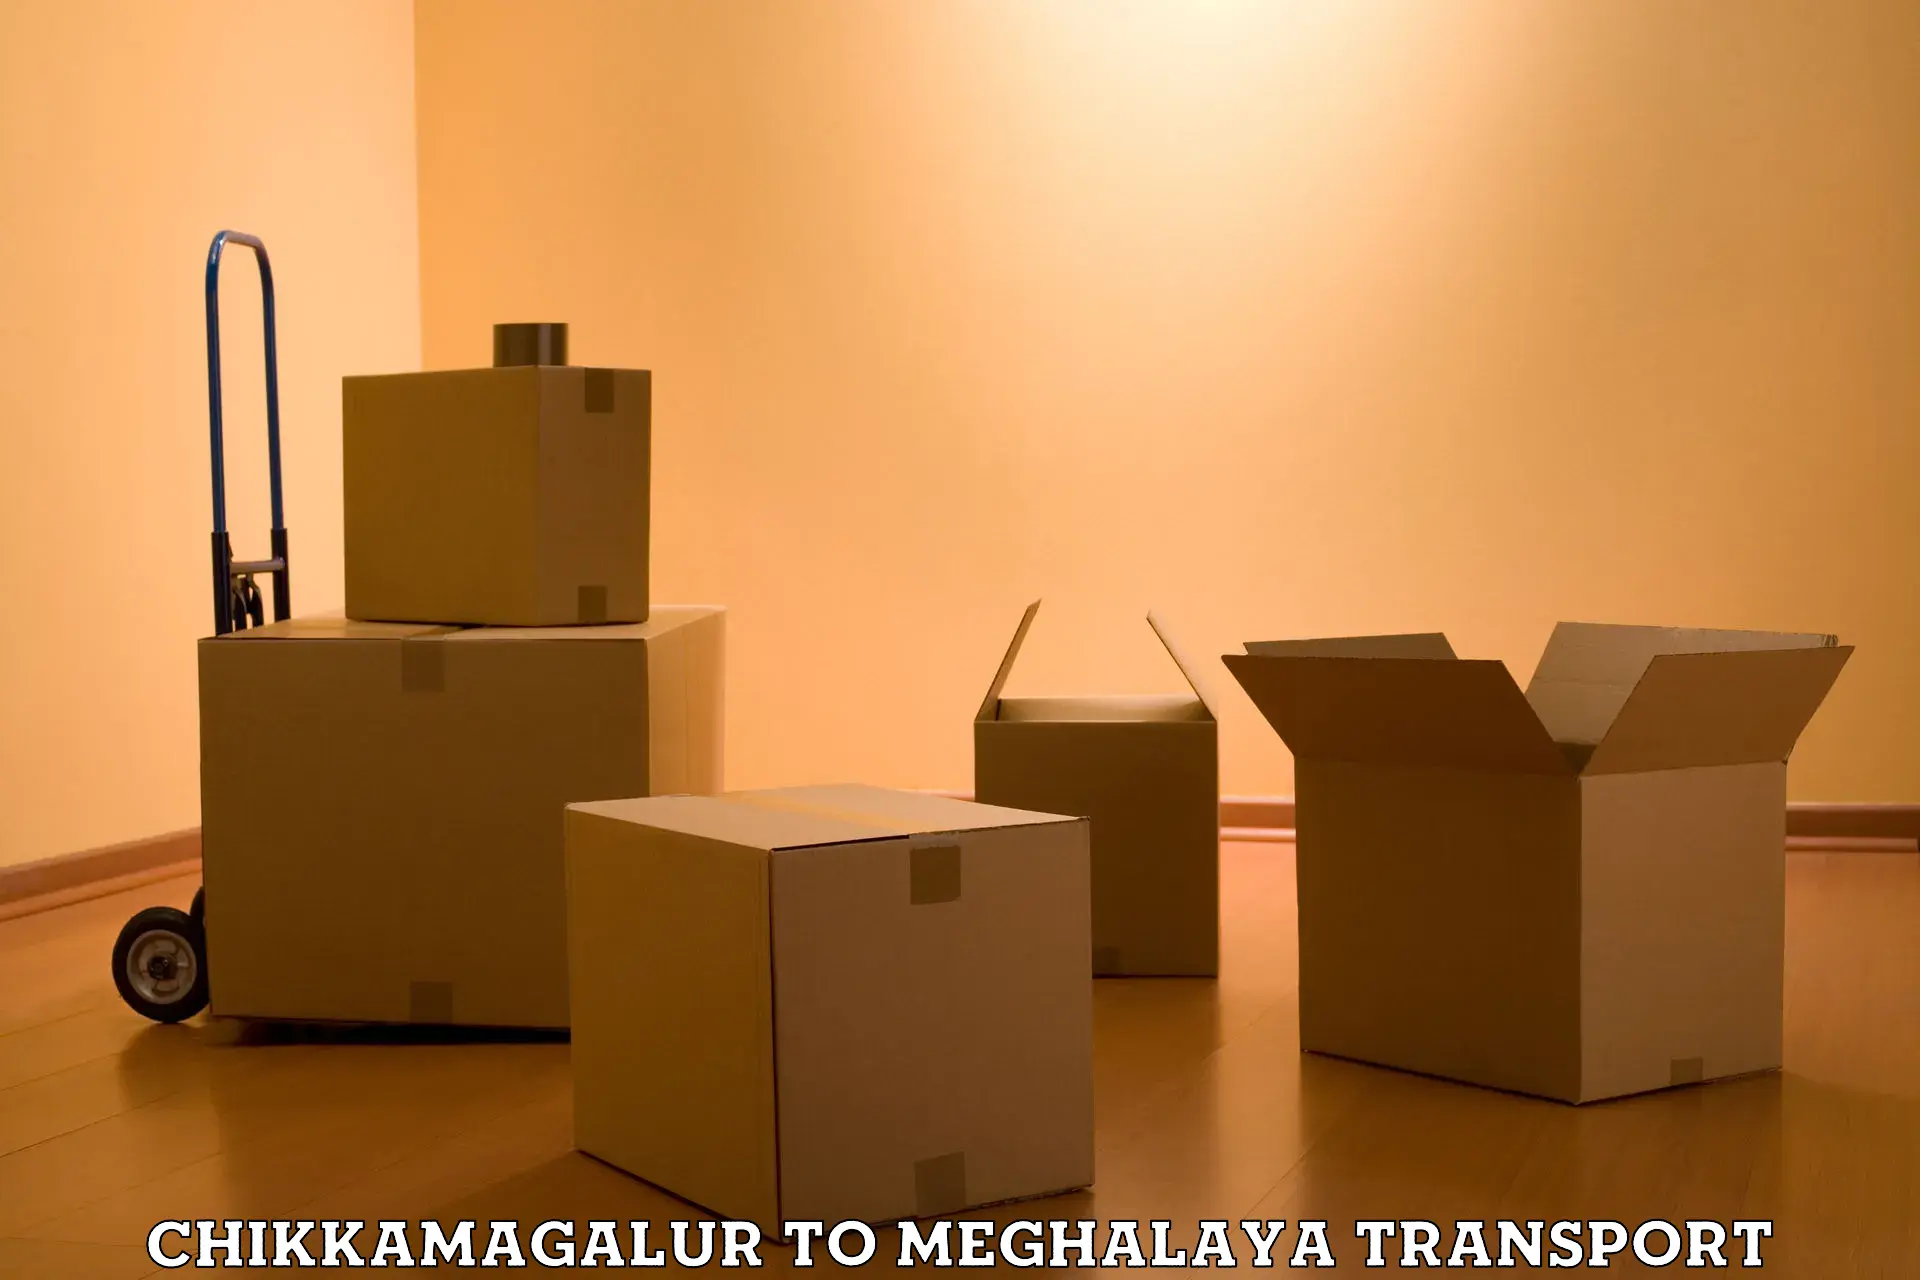 Delivery service Chikkamagalur to Meghalaya